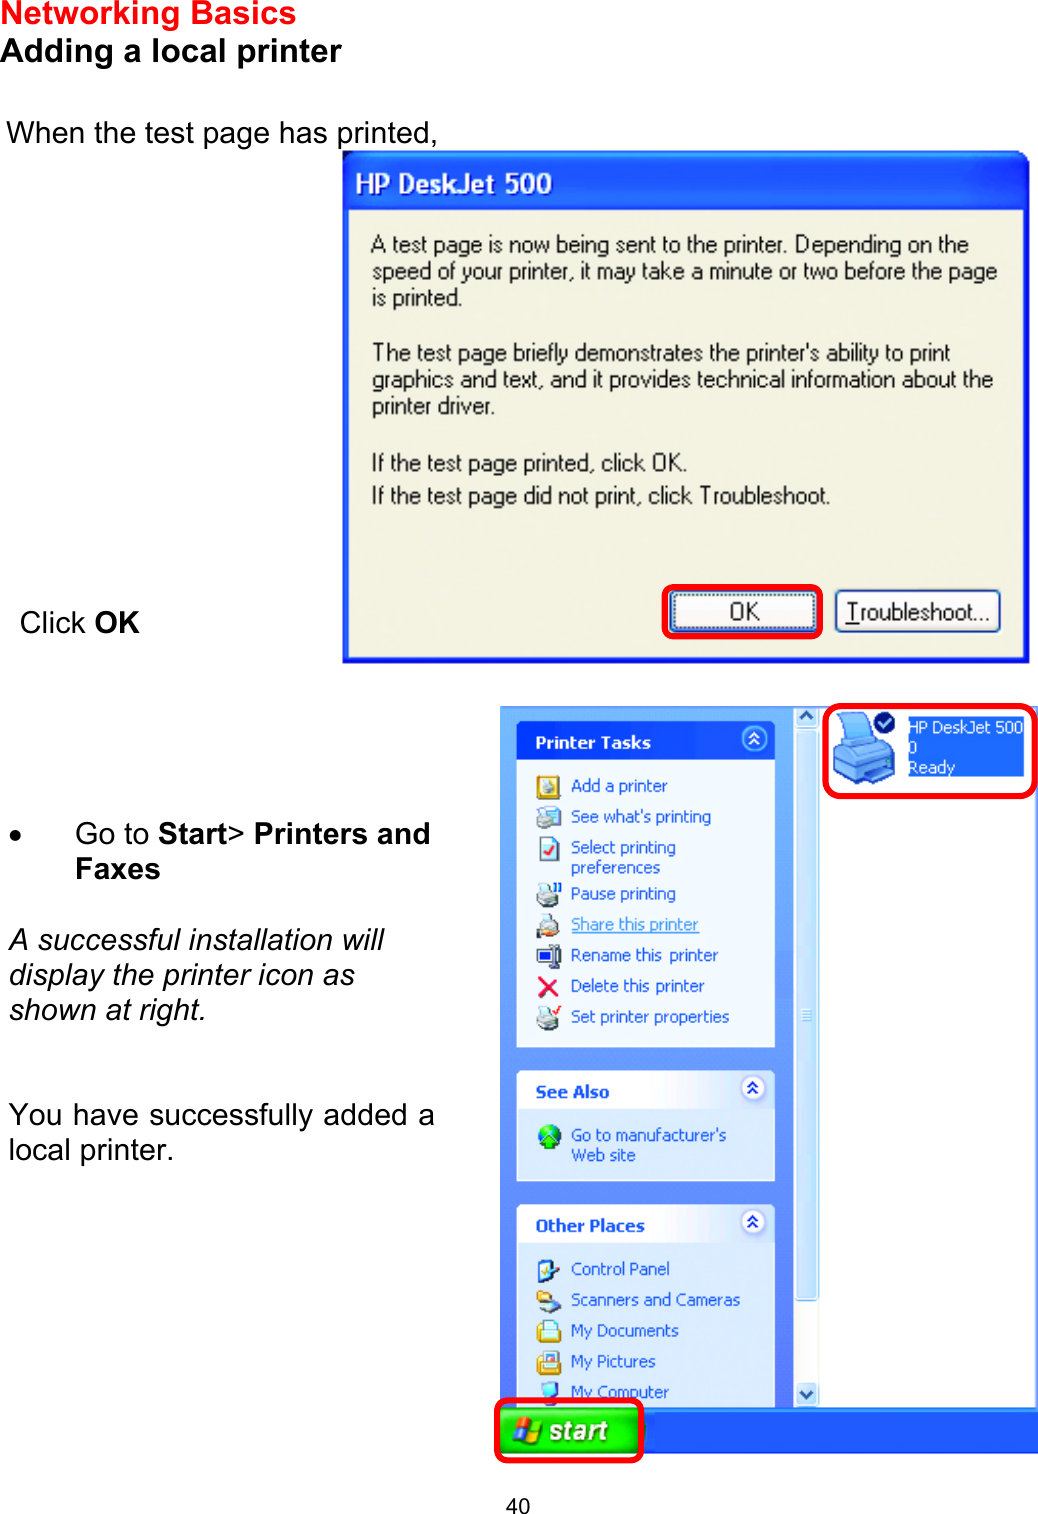  40Networking Basics  Adding a local printer        When the test page has printed, •  Go to Start&gt; Printers and Faxes   A successful installation will display the printer icon as shown at right.   You have successfully added alocal printer. Click OK 